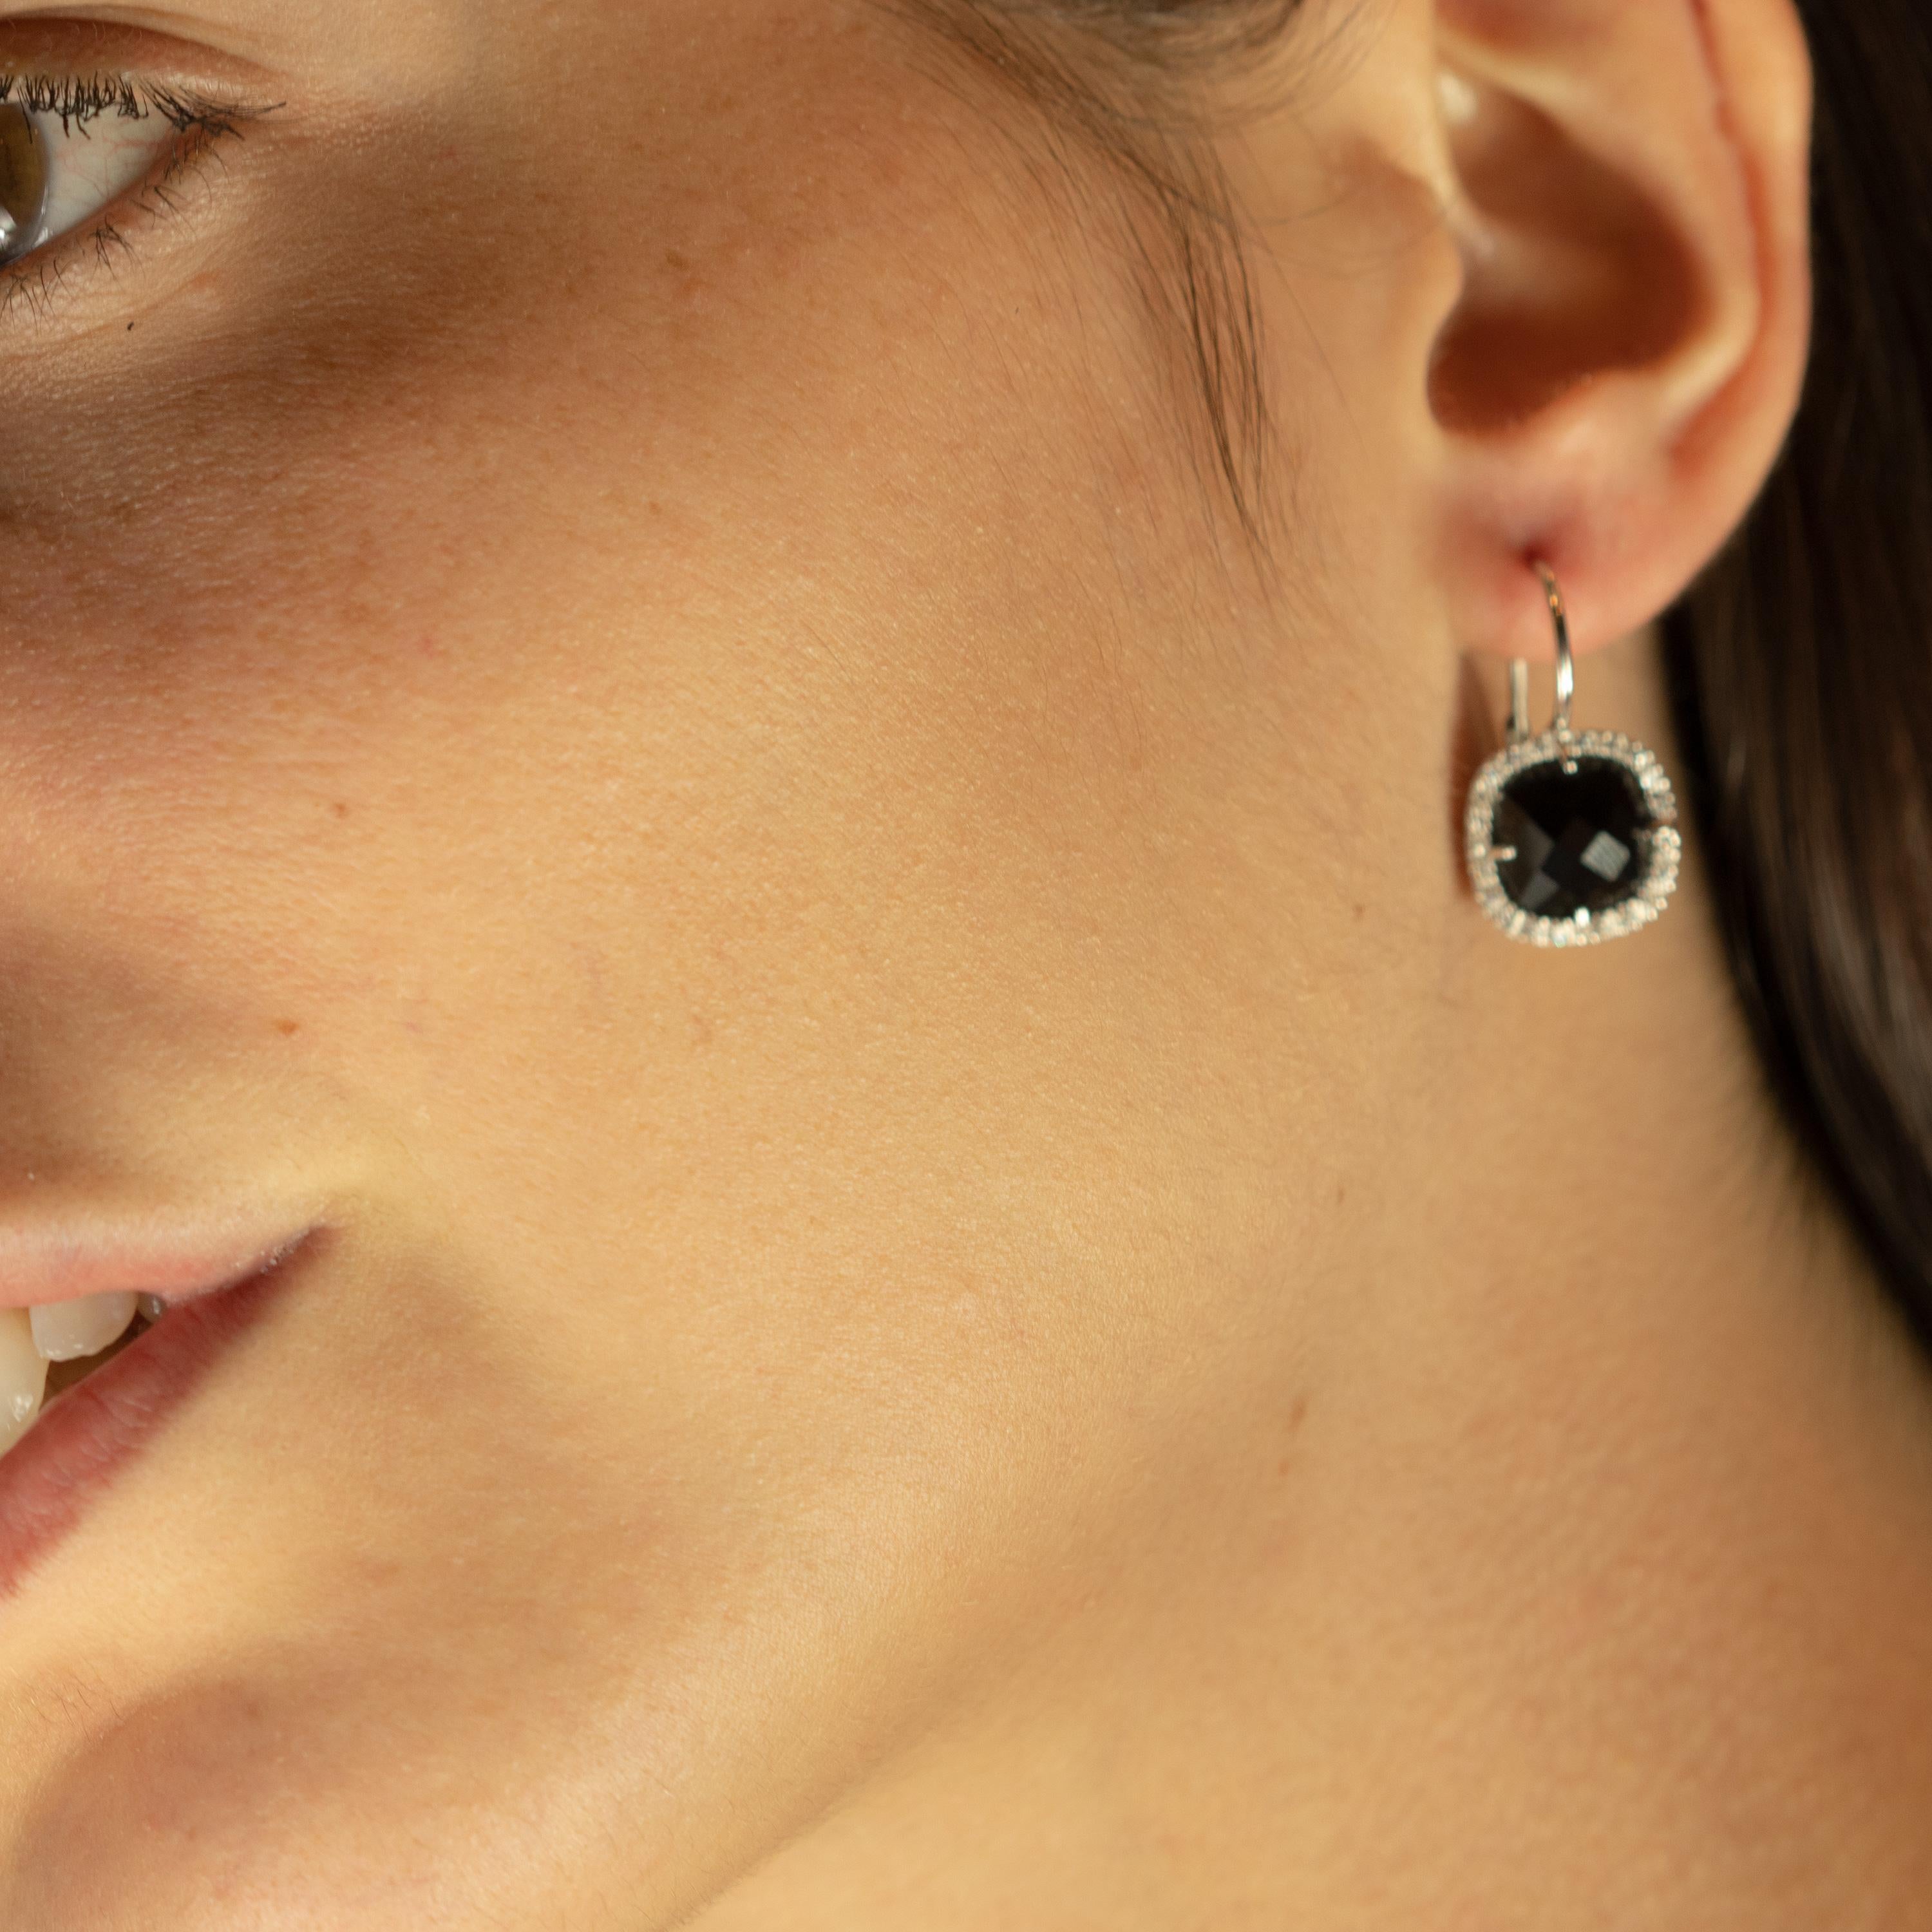 Vintage clip-on style earrings featured by a beautiful black square cushion onyx delicately surrounded by 0.9 carat diamonds. The stunning gems are setted in 18 karat white gold ear clips exceptionally priced. Black and white are the colors of